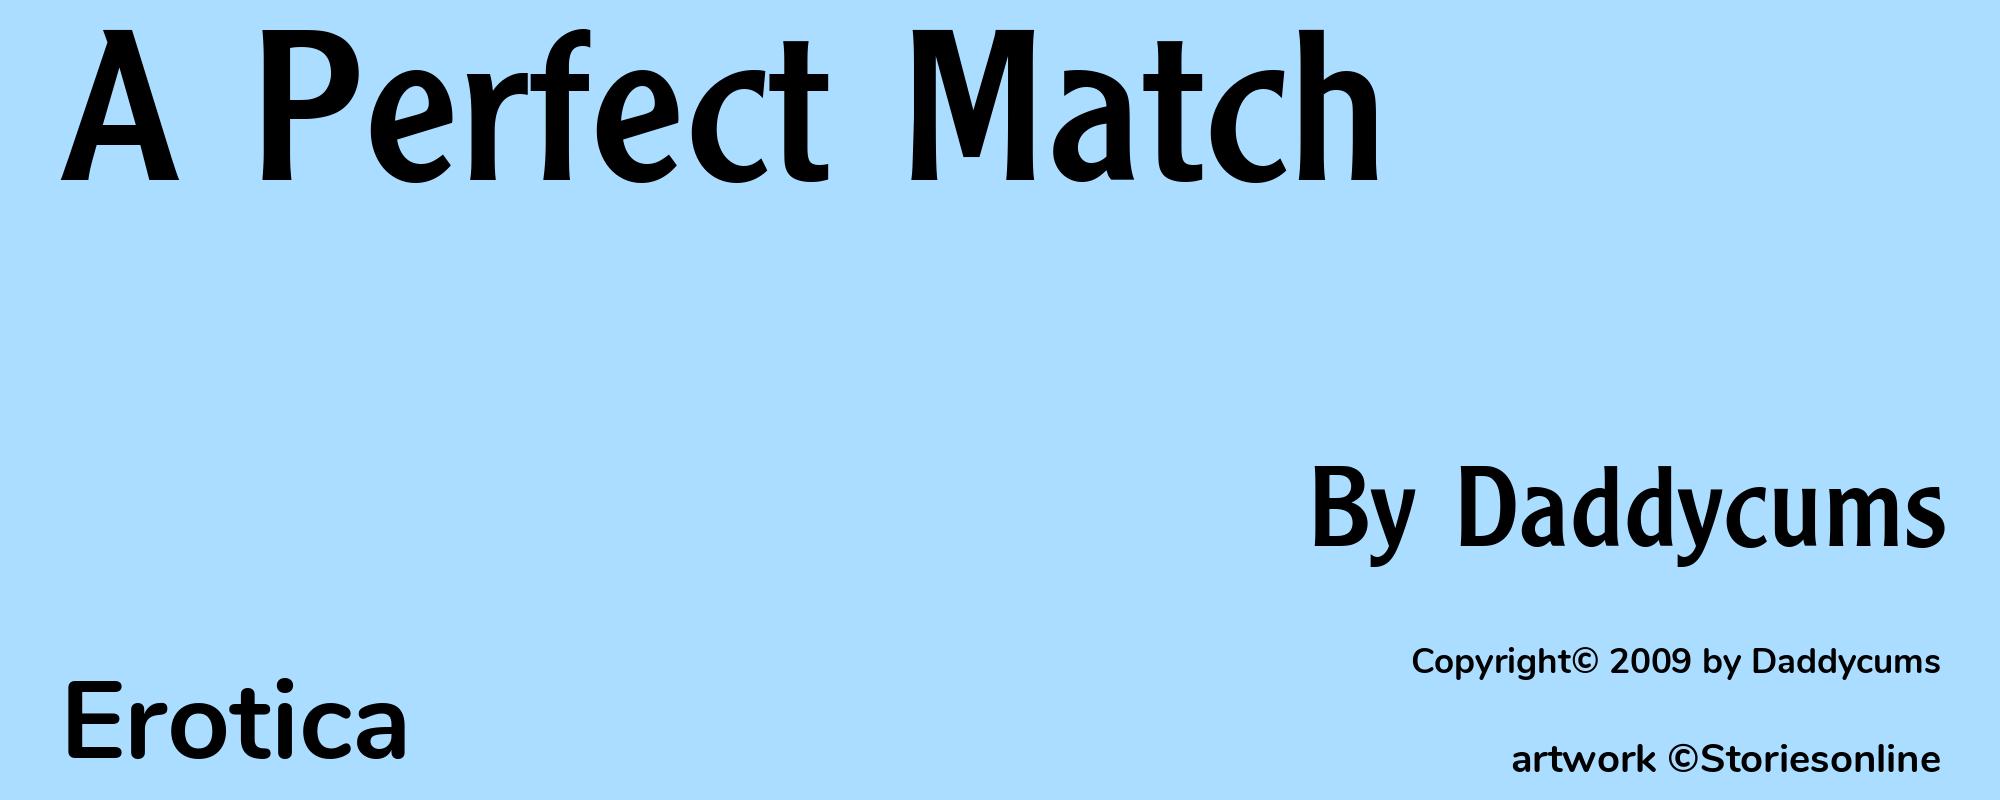 A Perfect Match - Cover